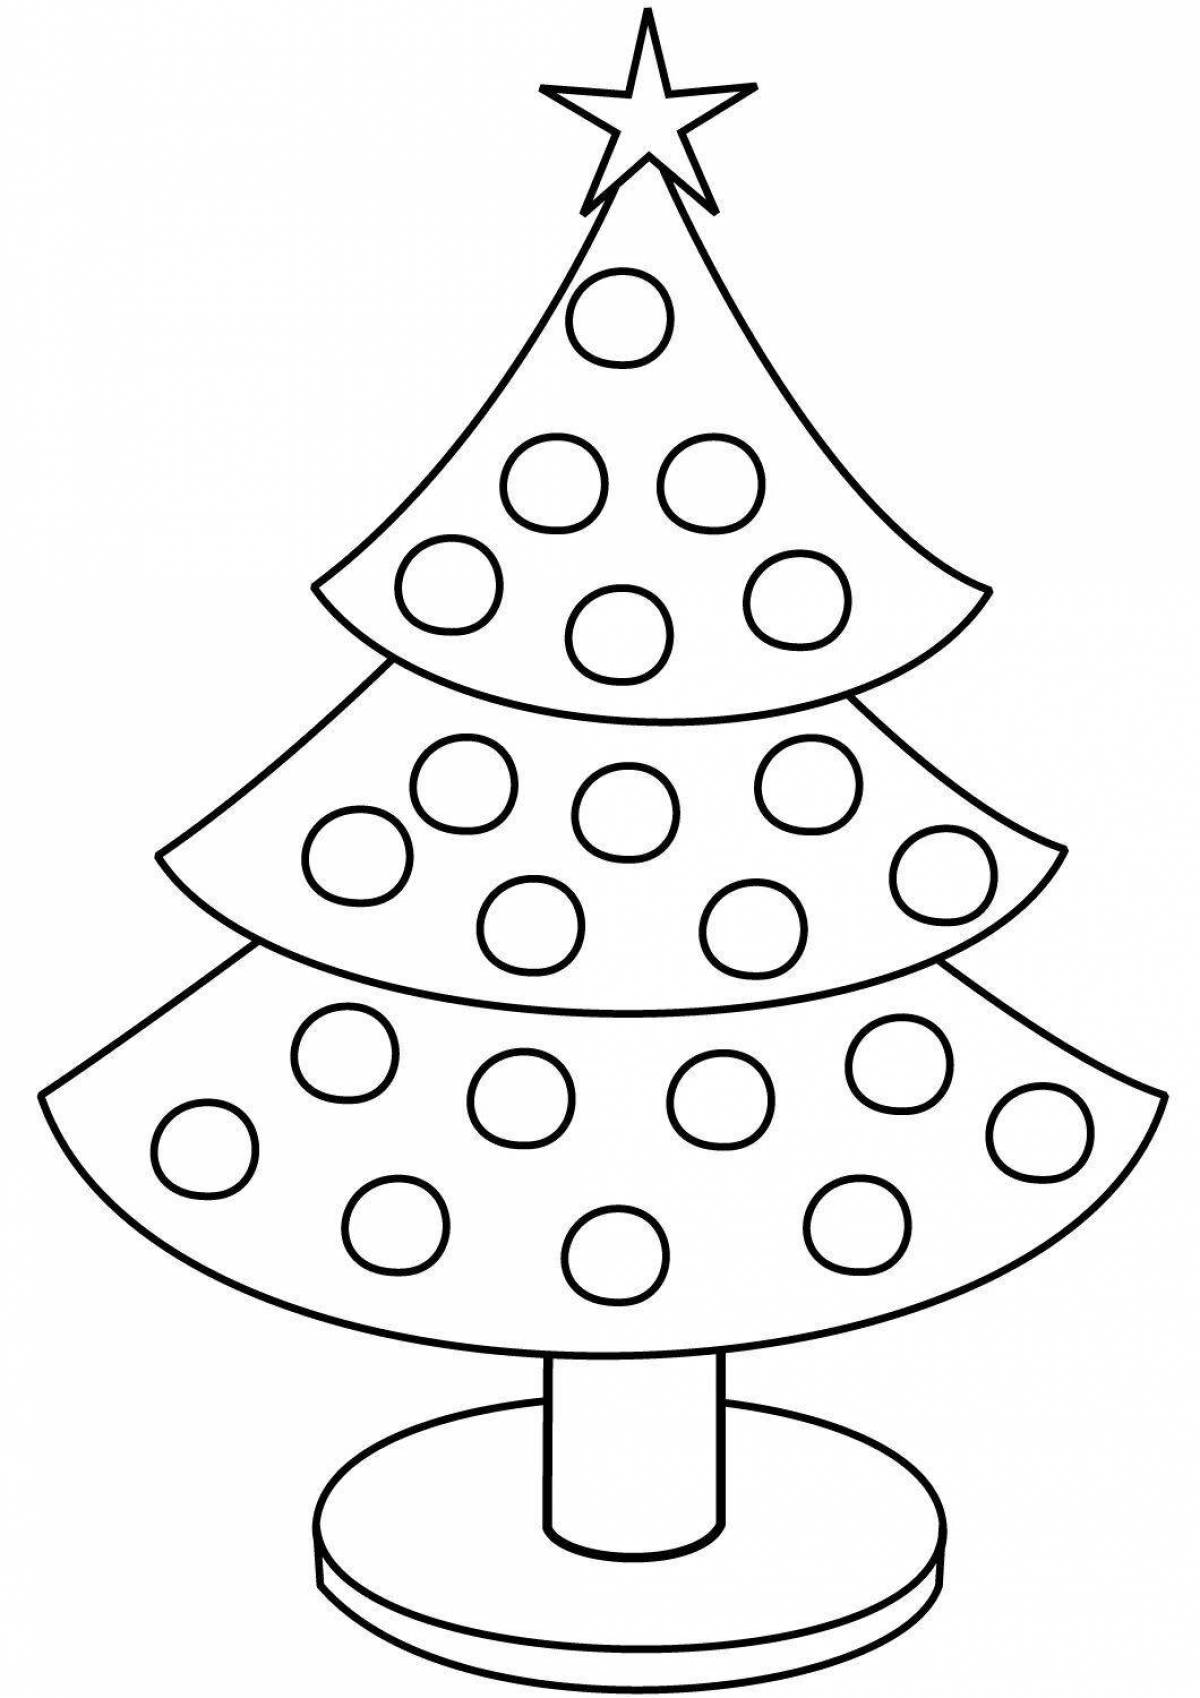 Great Christmas tree picture for kids